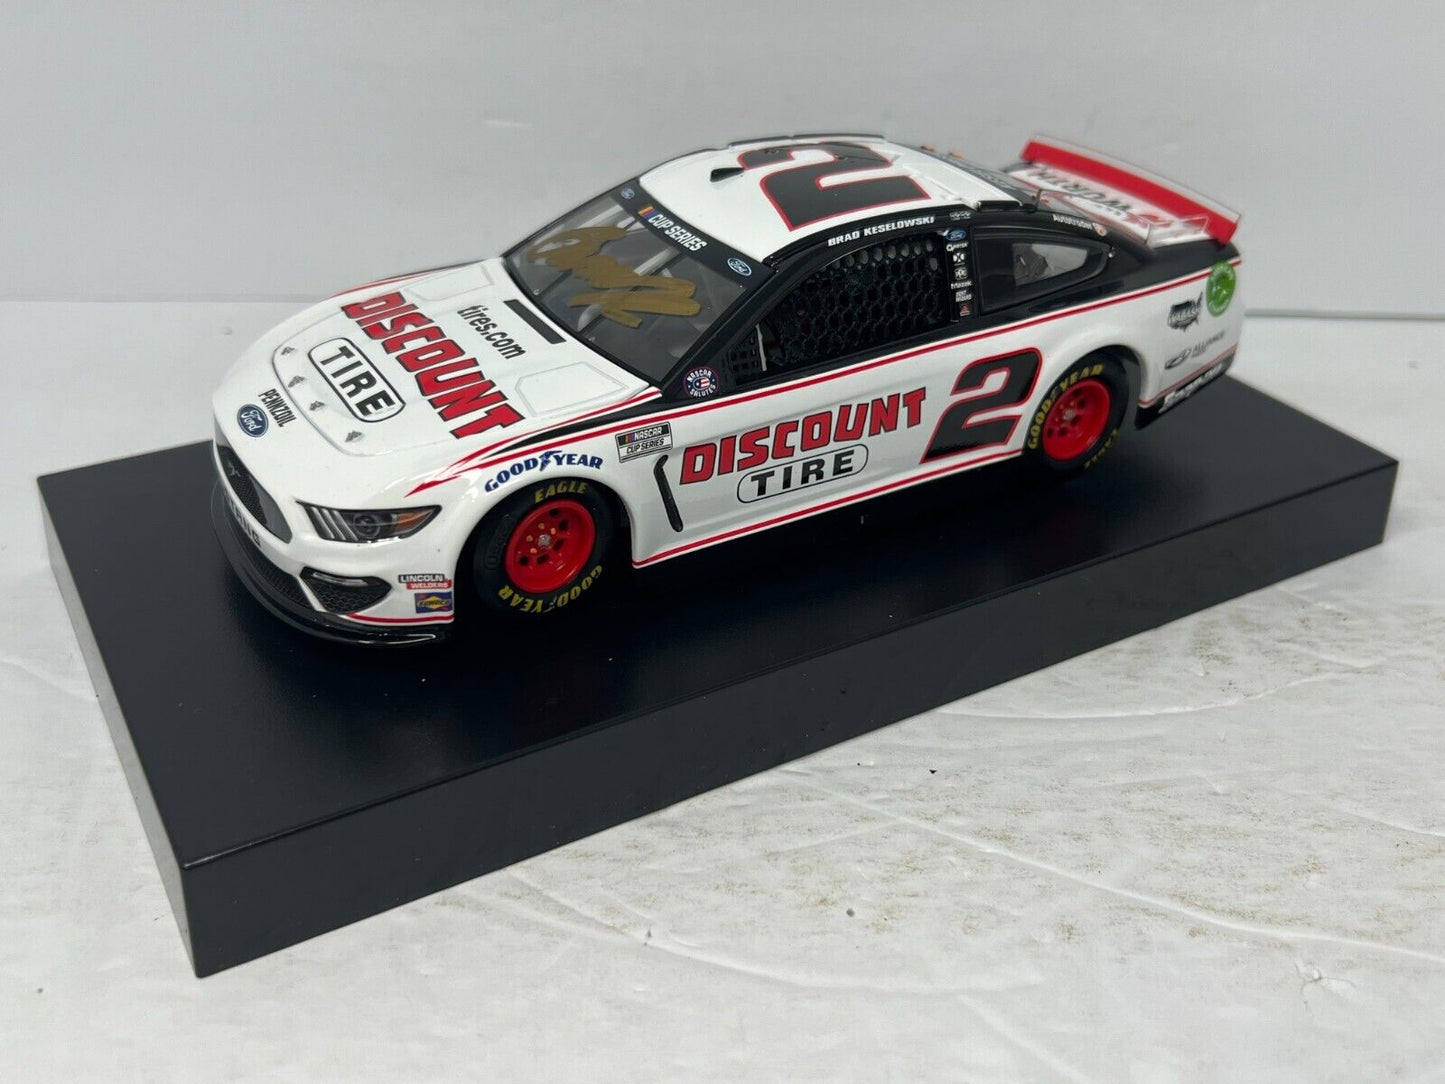 Lionel Racing #2 Brad Keselowski Mustang 1:24 Diecast Autographed (1 of 96#)